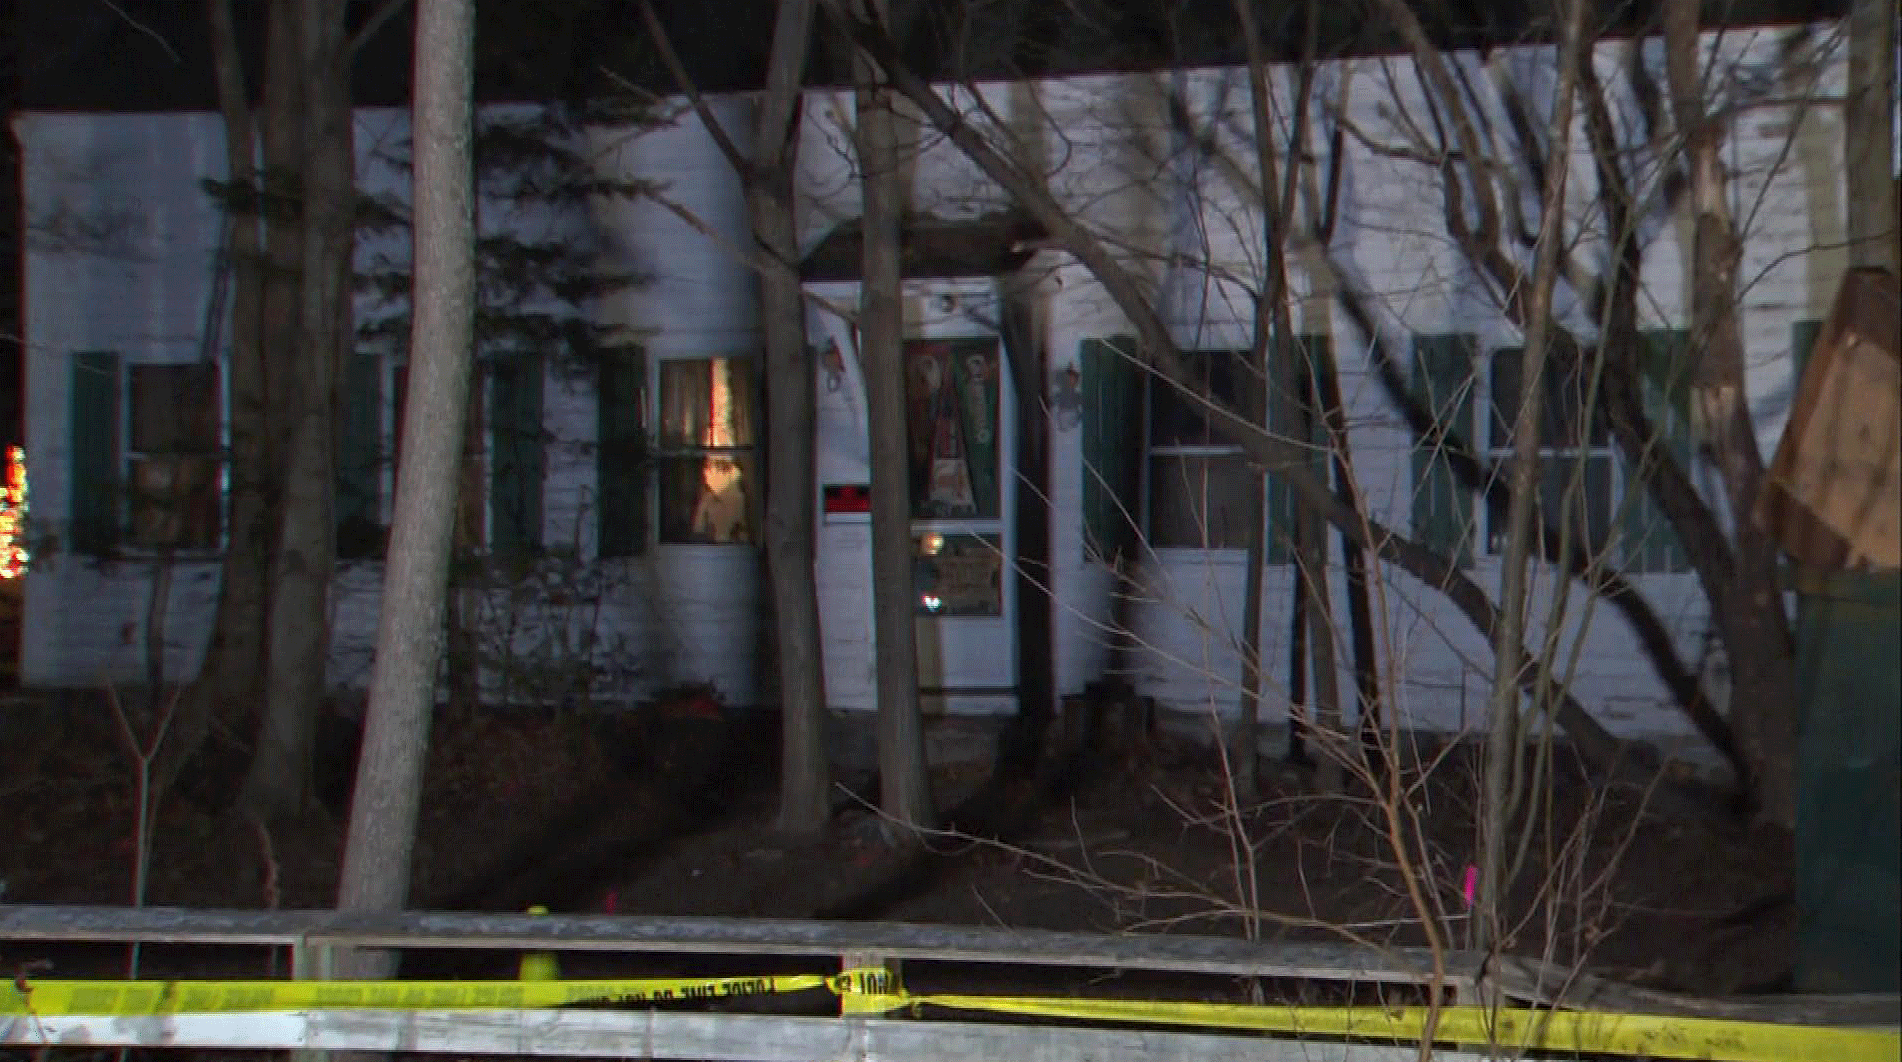 Investigators taped off Haskell's home. (WBZ-TV)